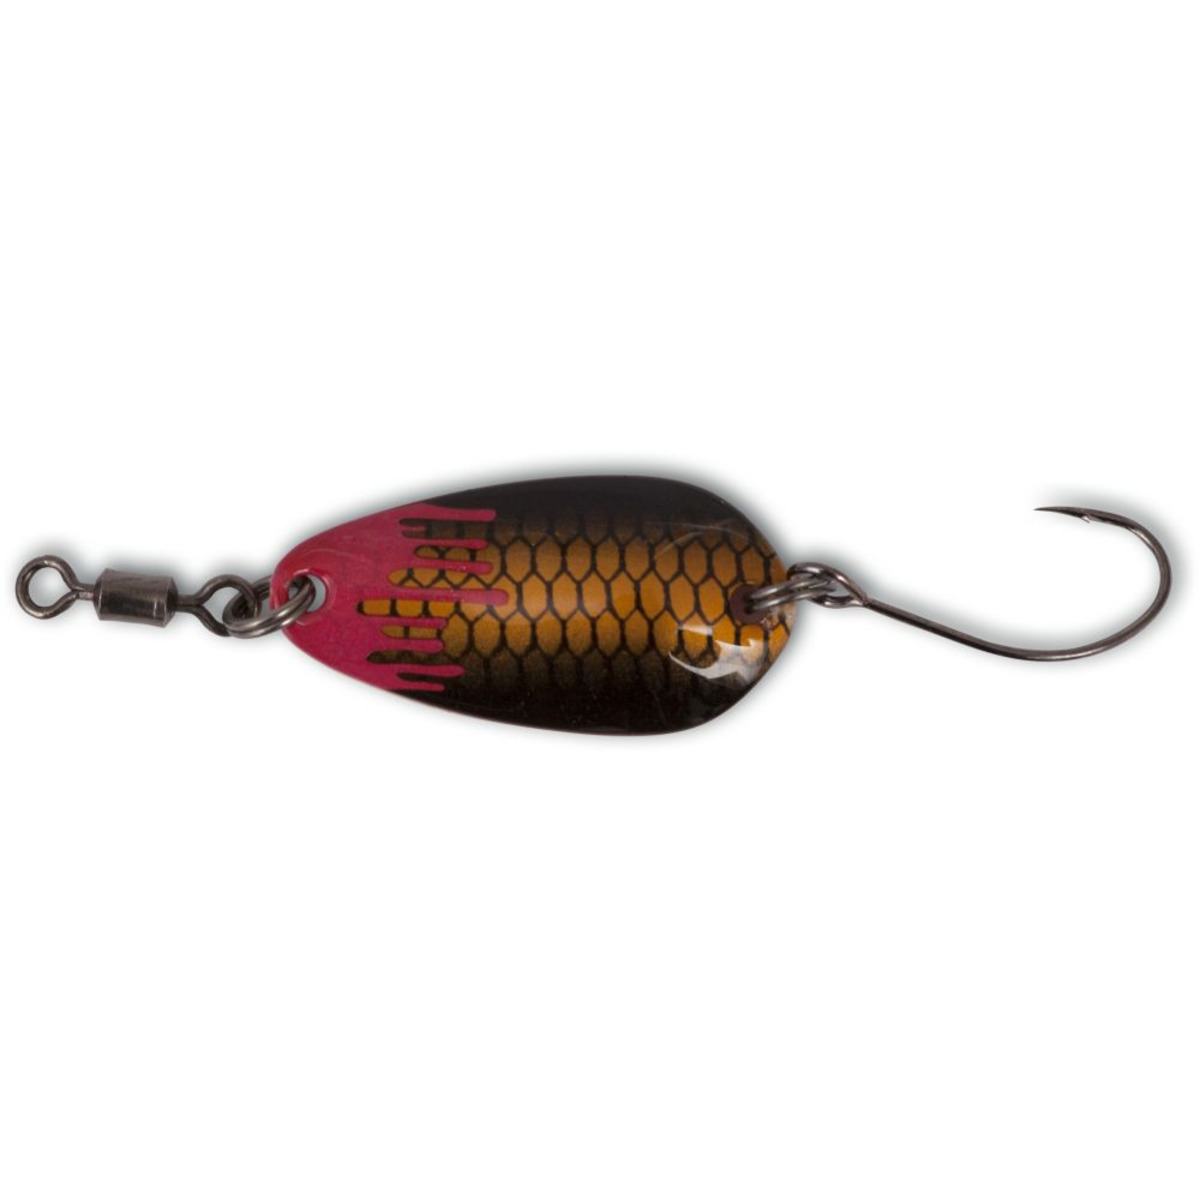 Magic Trout Bloody Loony Spoon - 2 g copper/black